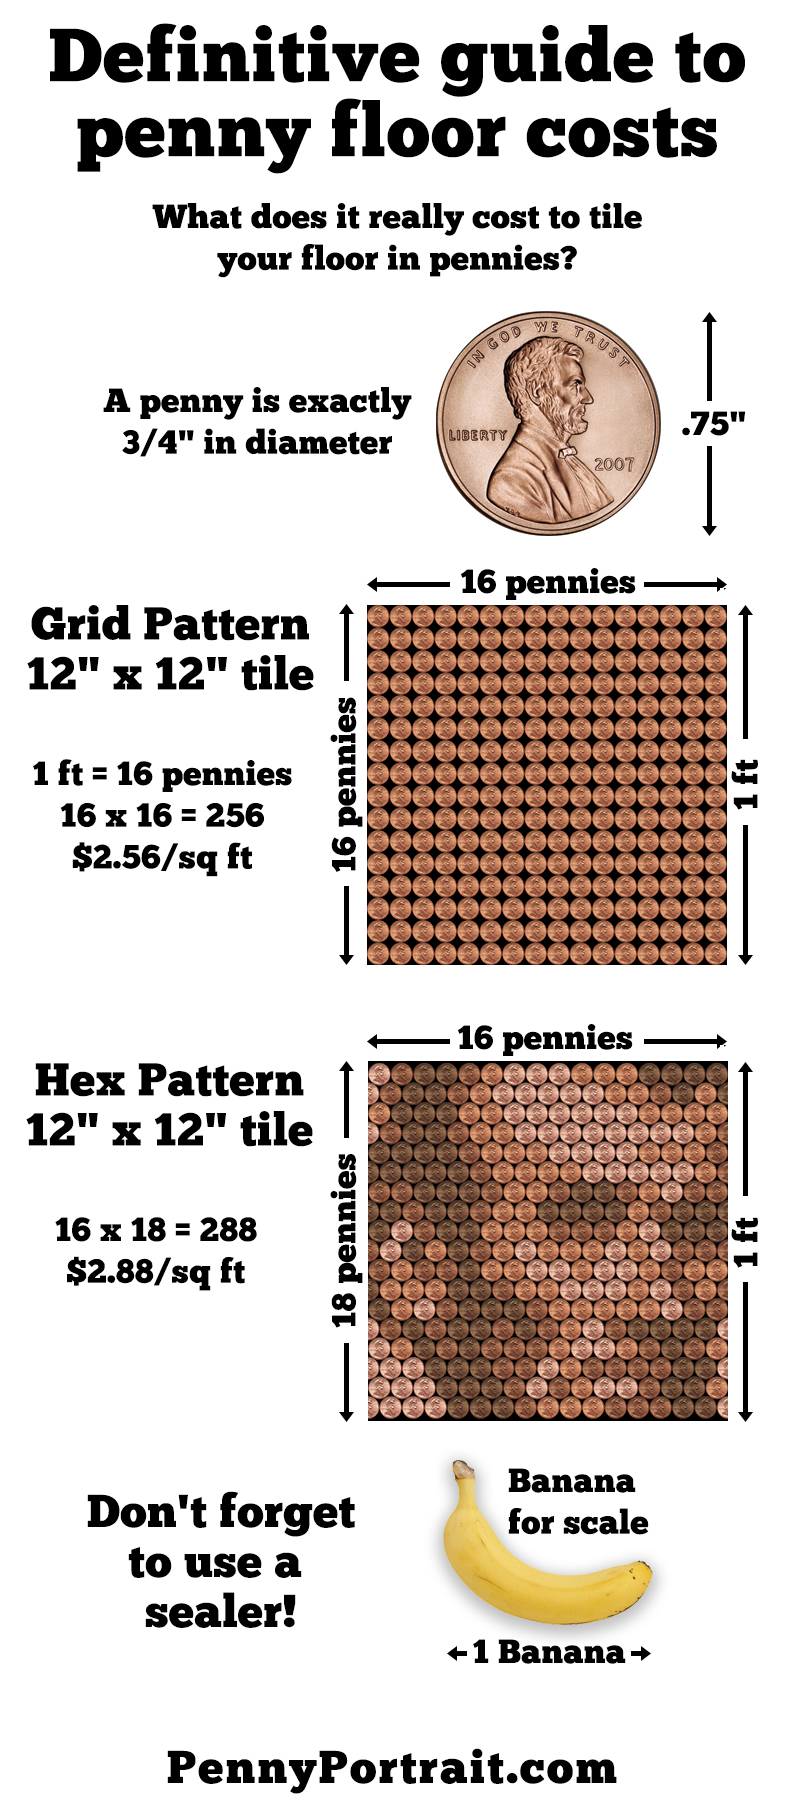 Definitive guide to penny floor costs infographic